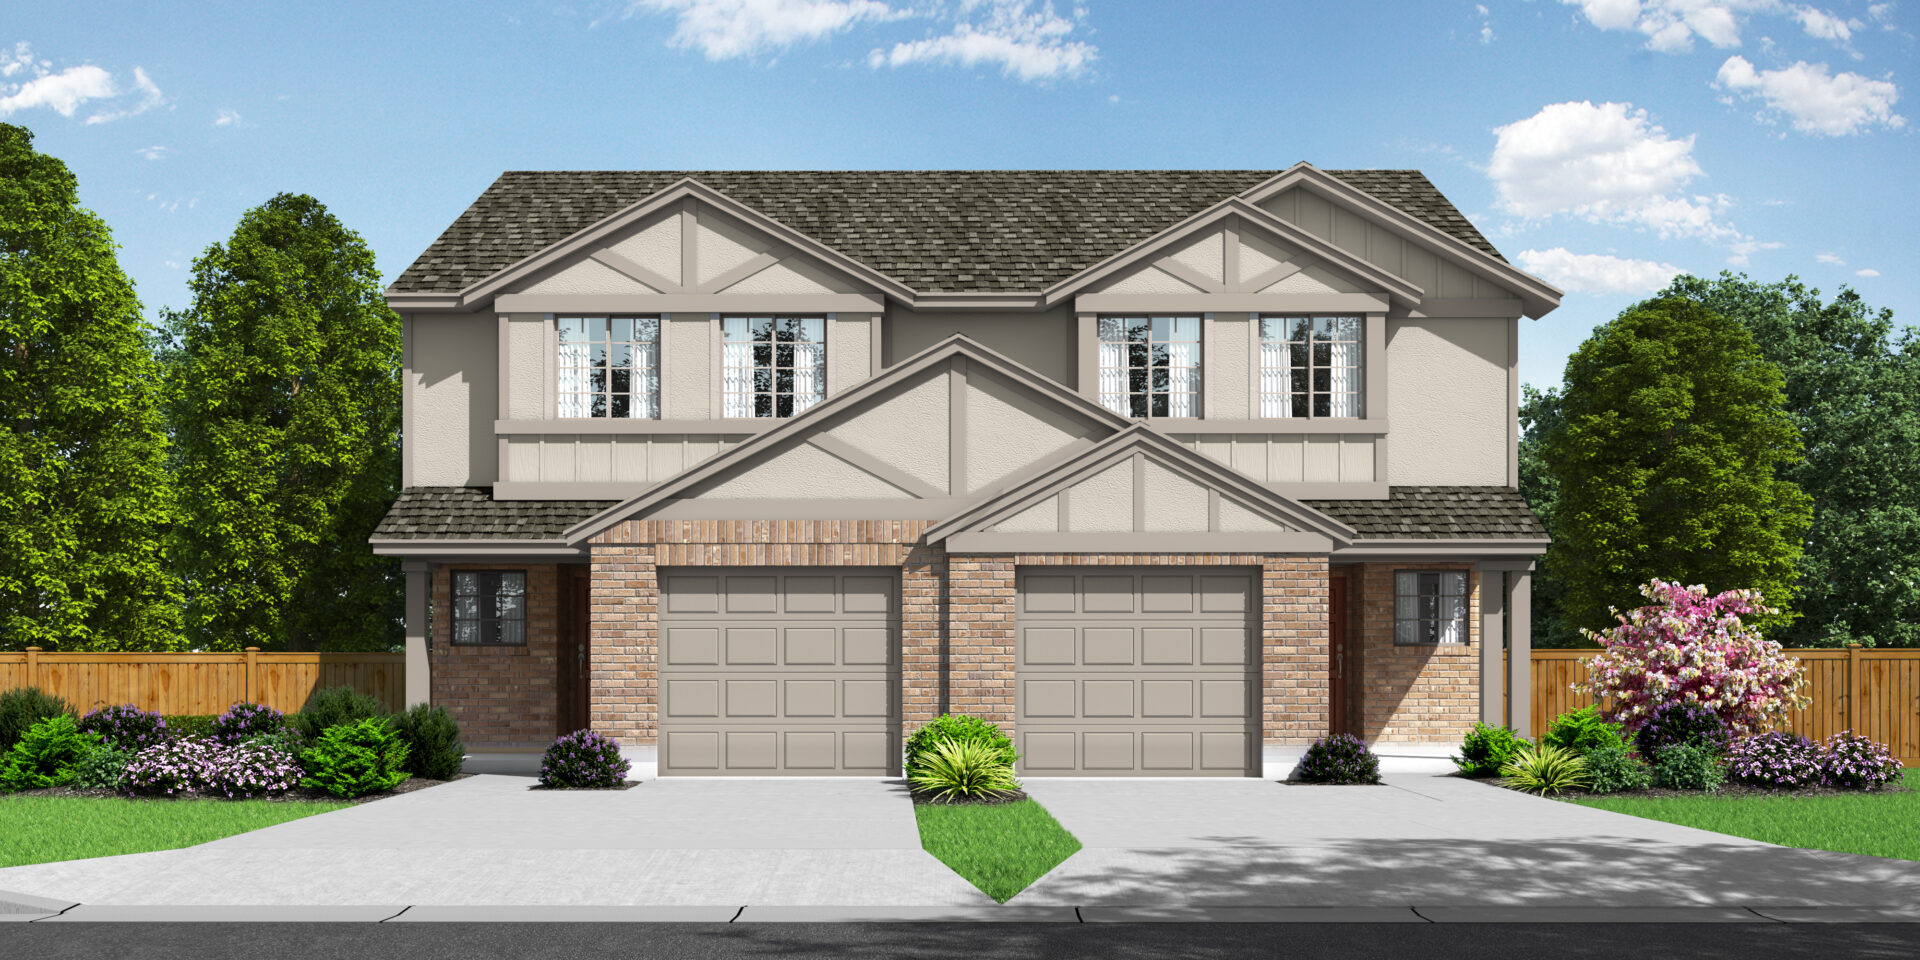  Lake Park Villas - New Phase Now Selling! New Homes in Wylie